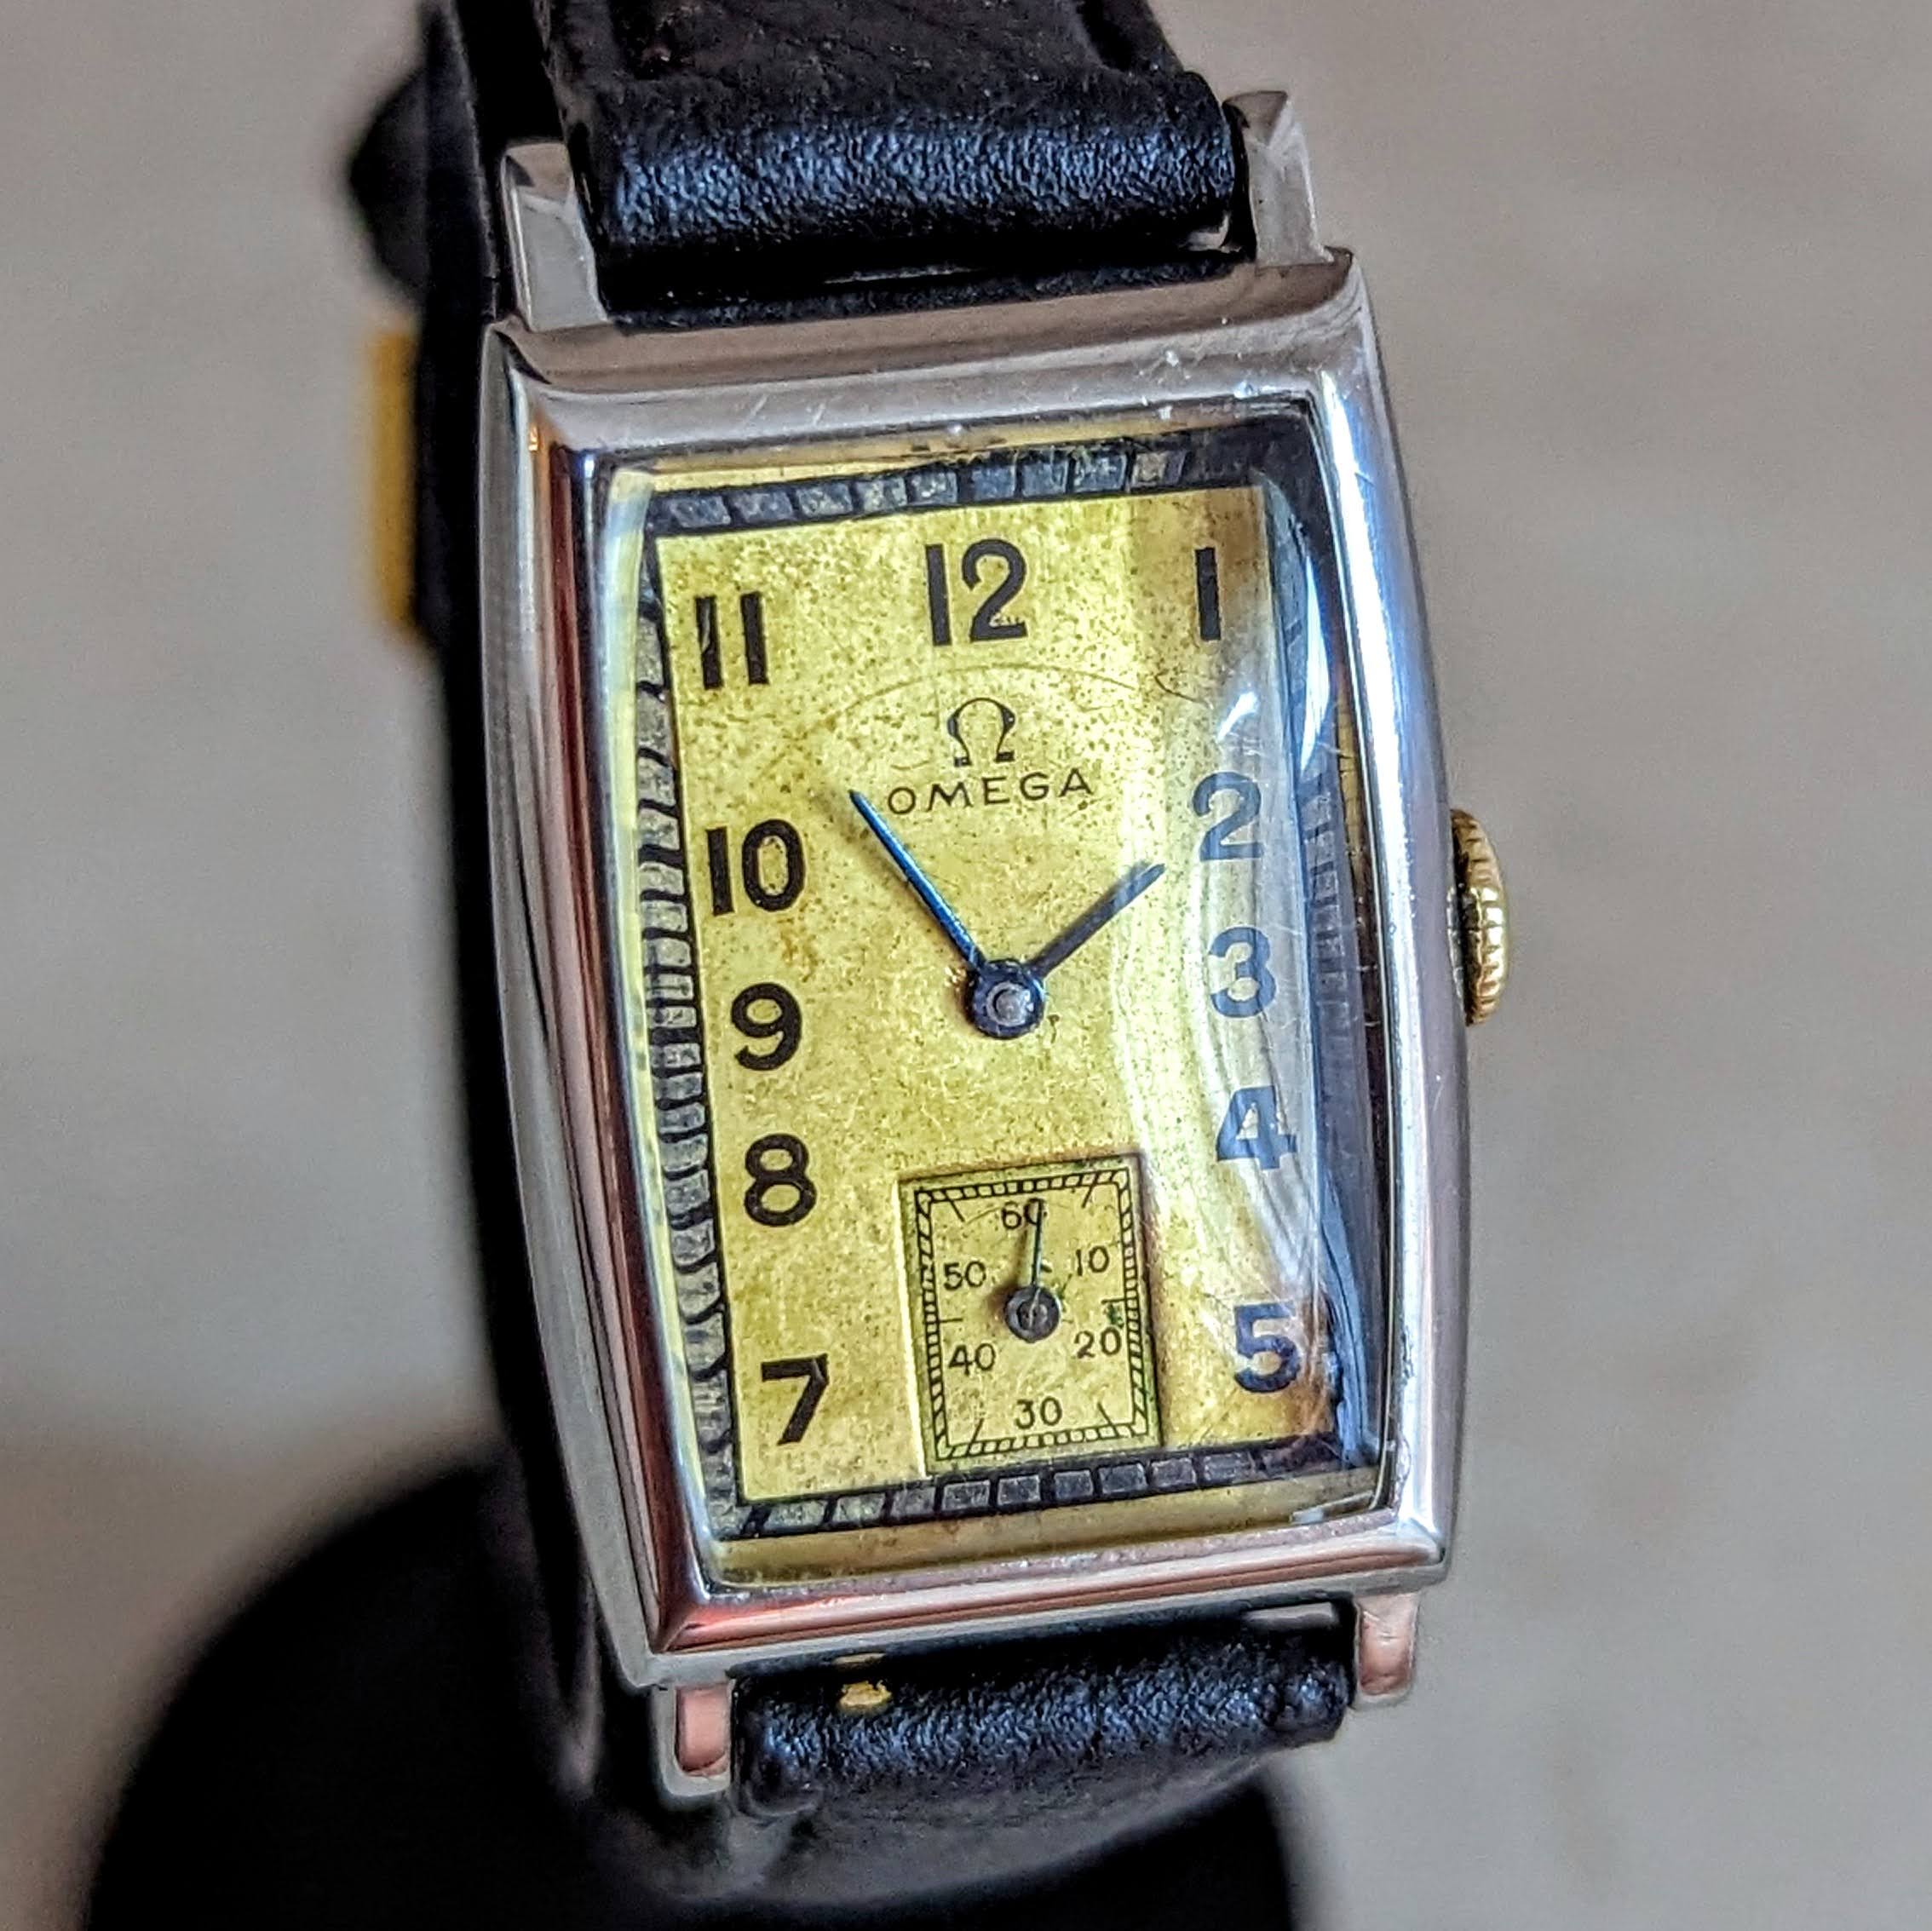 1934 OMEGA Art Deco Wristwatch Cal. T17 15 Jewels Tank Case ALL S.S. Vintage Watch